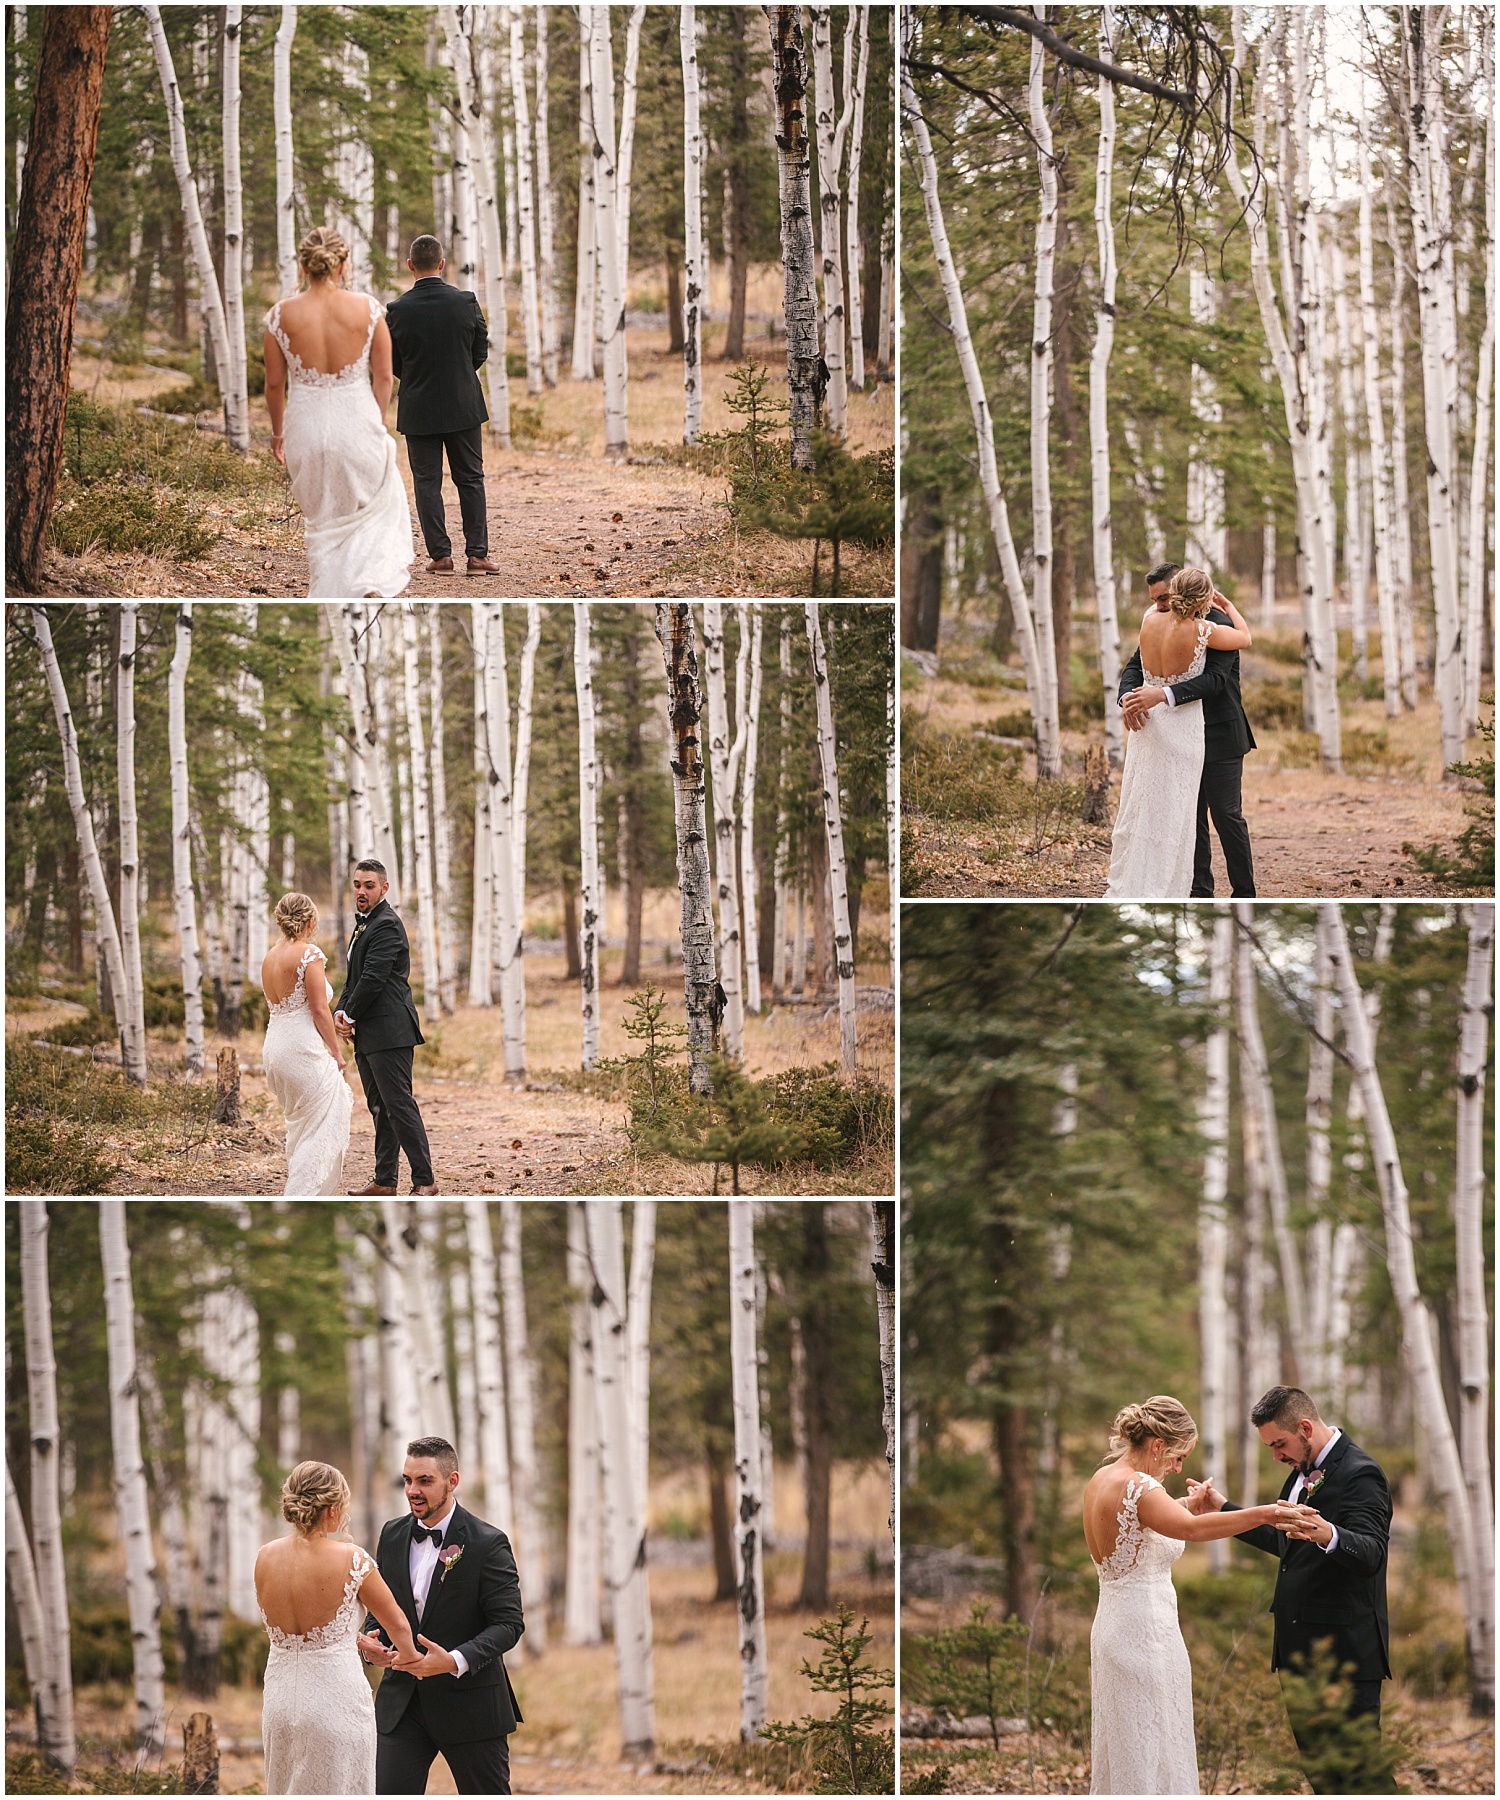 Bride and groom's first look in forest of aspen trees in Woodland Park Colorado